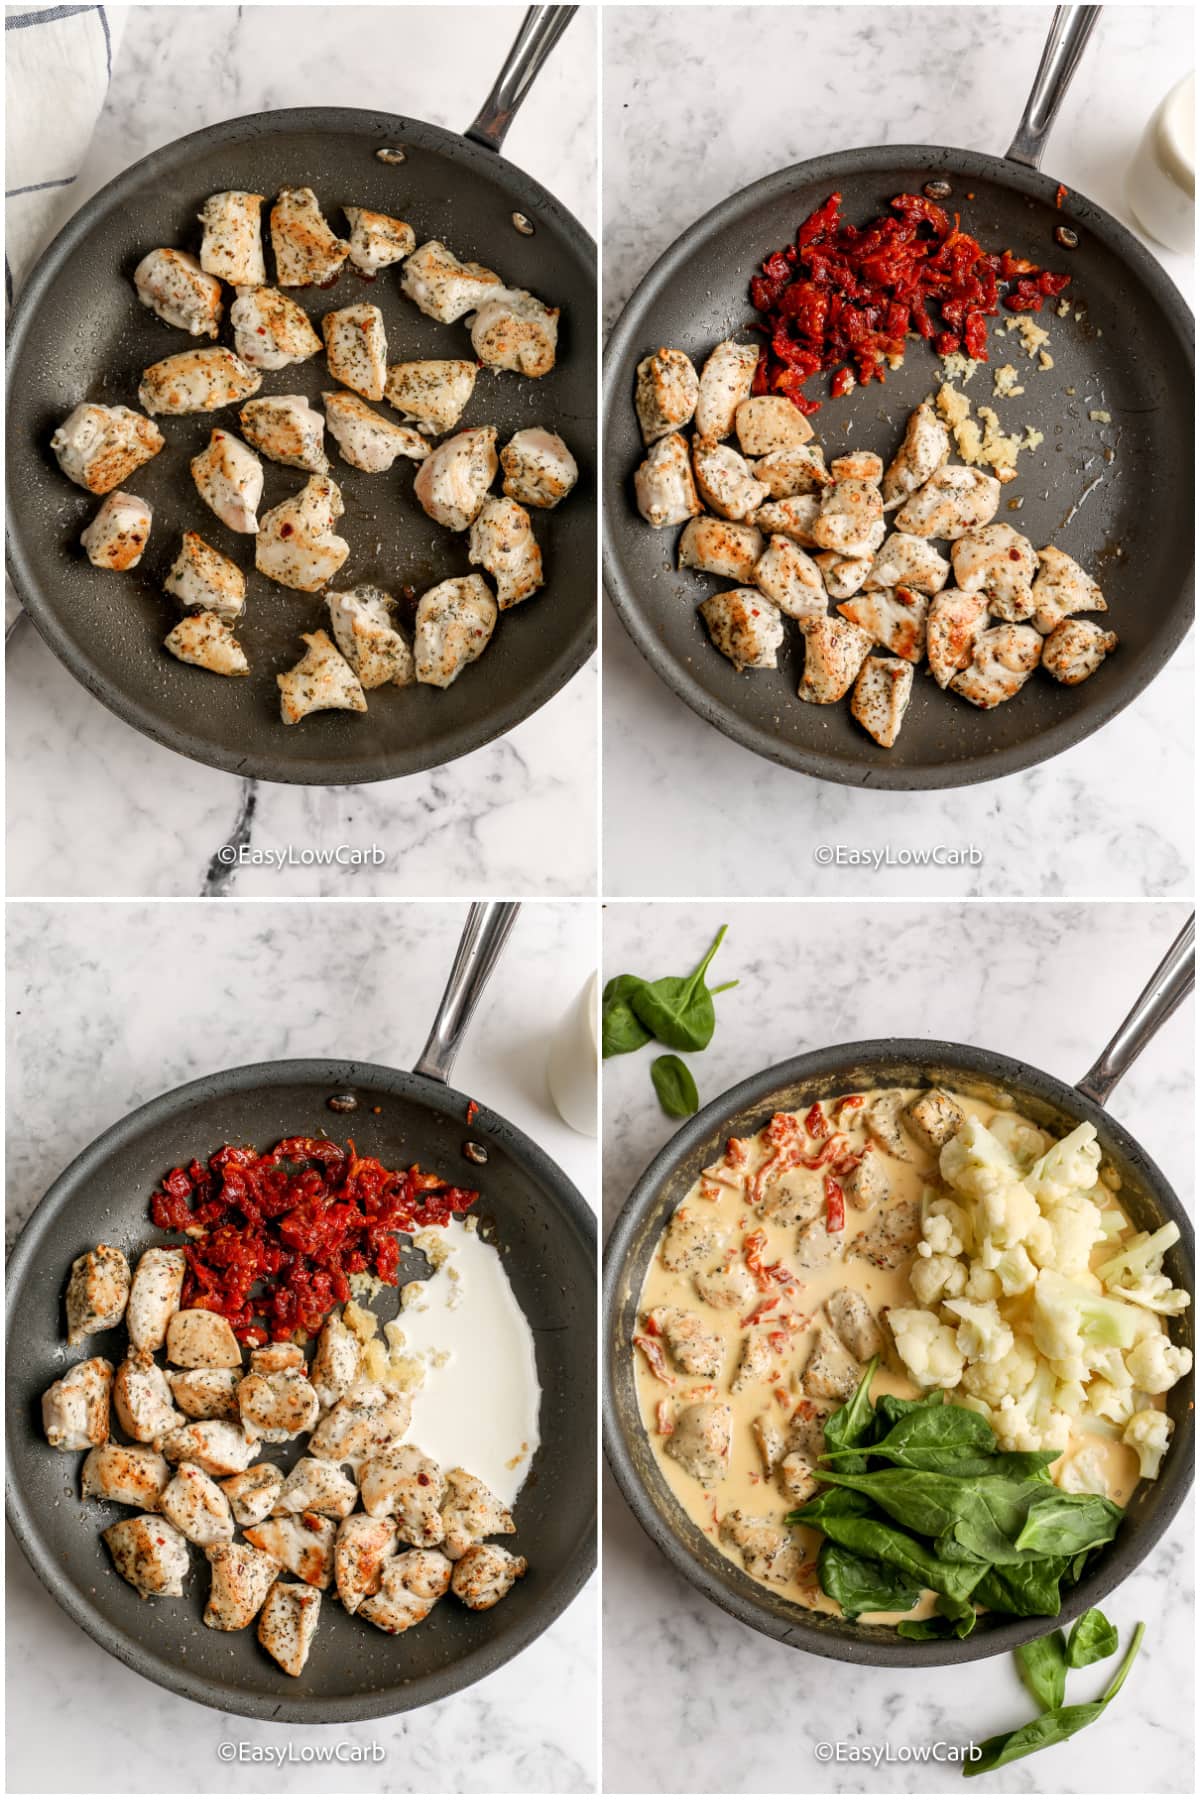 process of mixing ingredients for creamy tuscan chicken skillet in pan